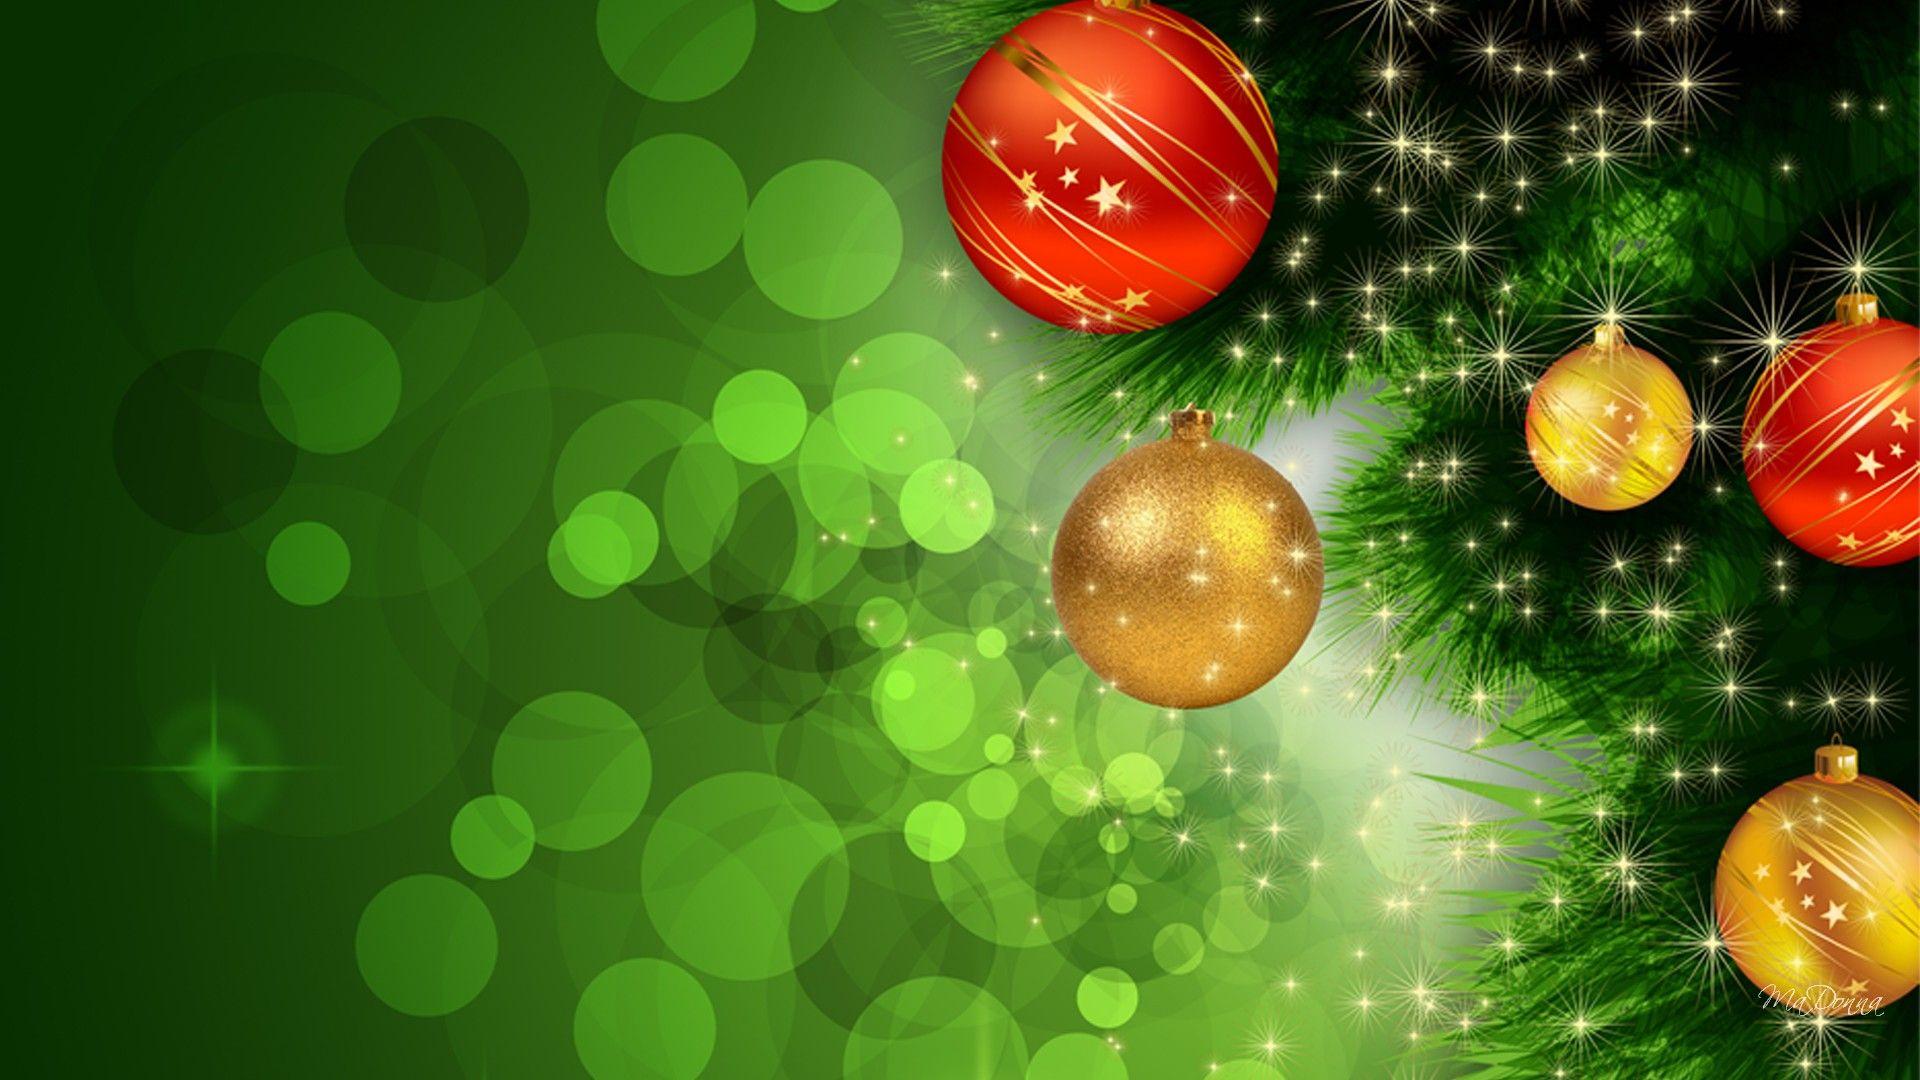 Holiday-themed Christmas background green for festive videos